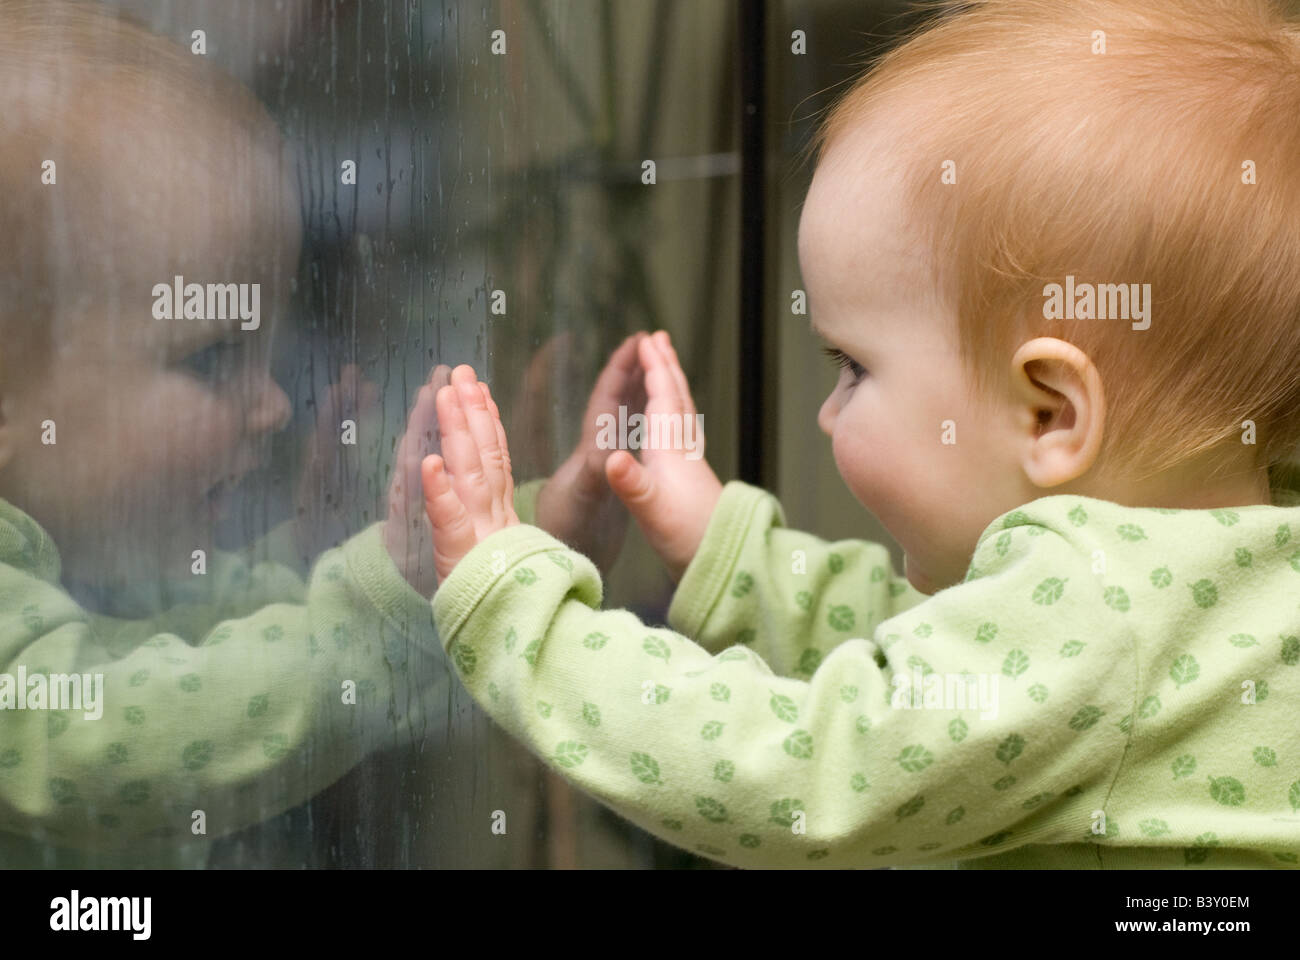 baby looking at her reflection on  window with raindrops Stock Photo